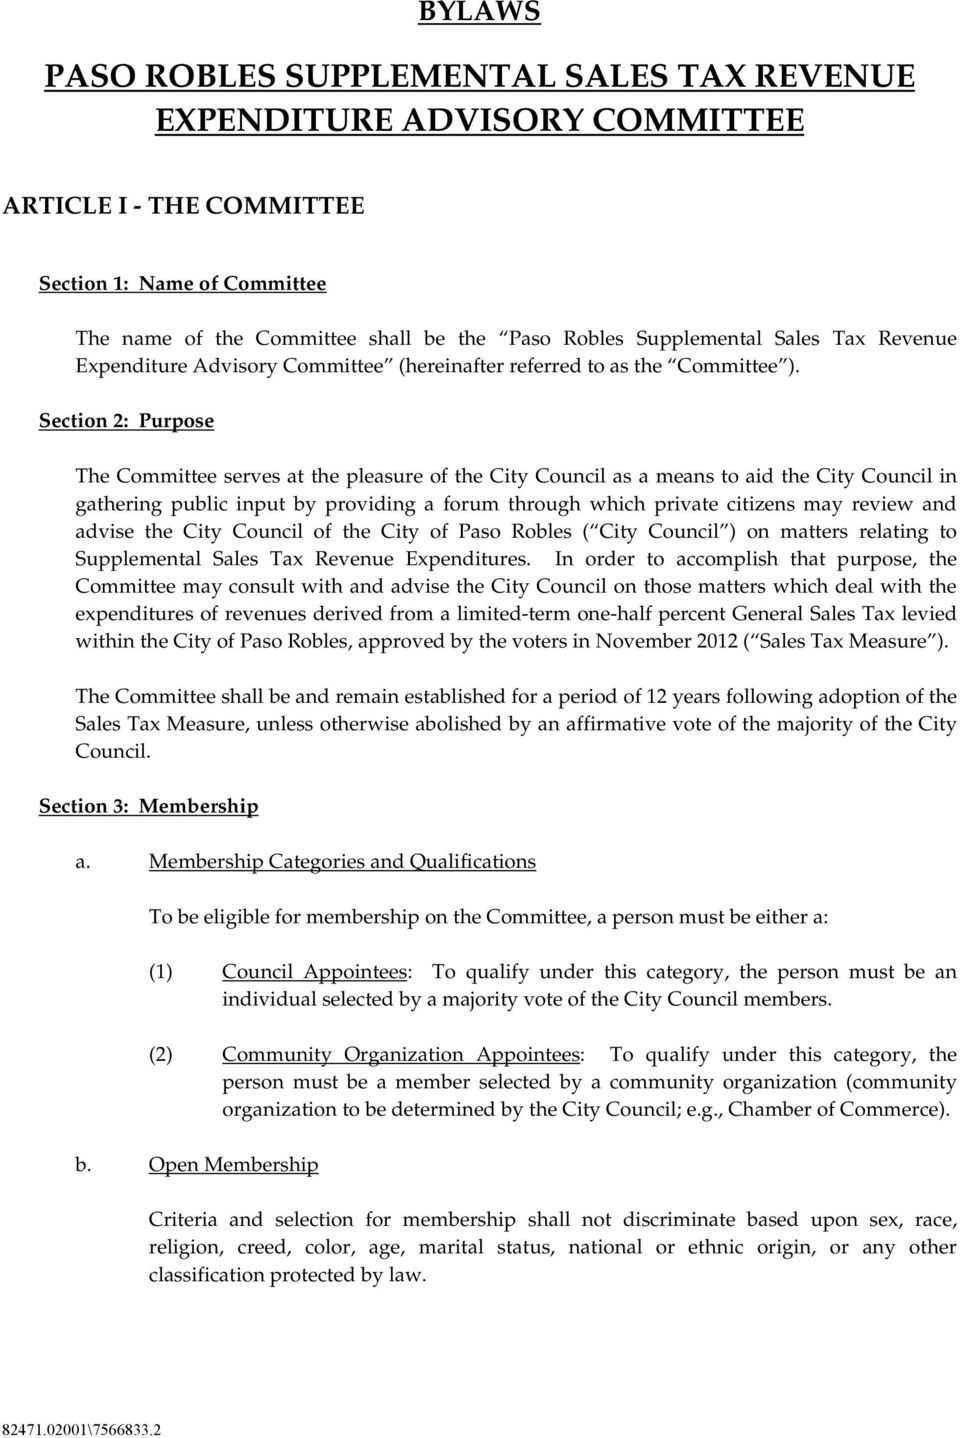 Section 2: Purpose The Committee serves at the pleasure of the City Council as a means to aid the City Council in gathering public input by providing a forum through which private citizens may review